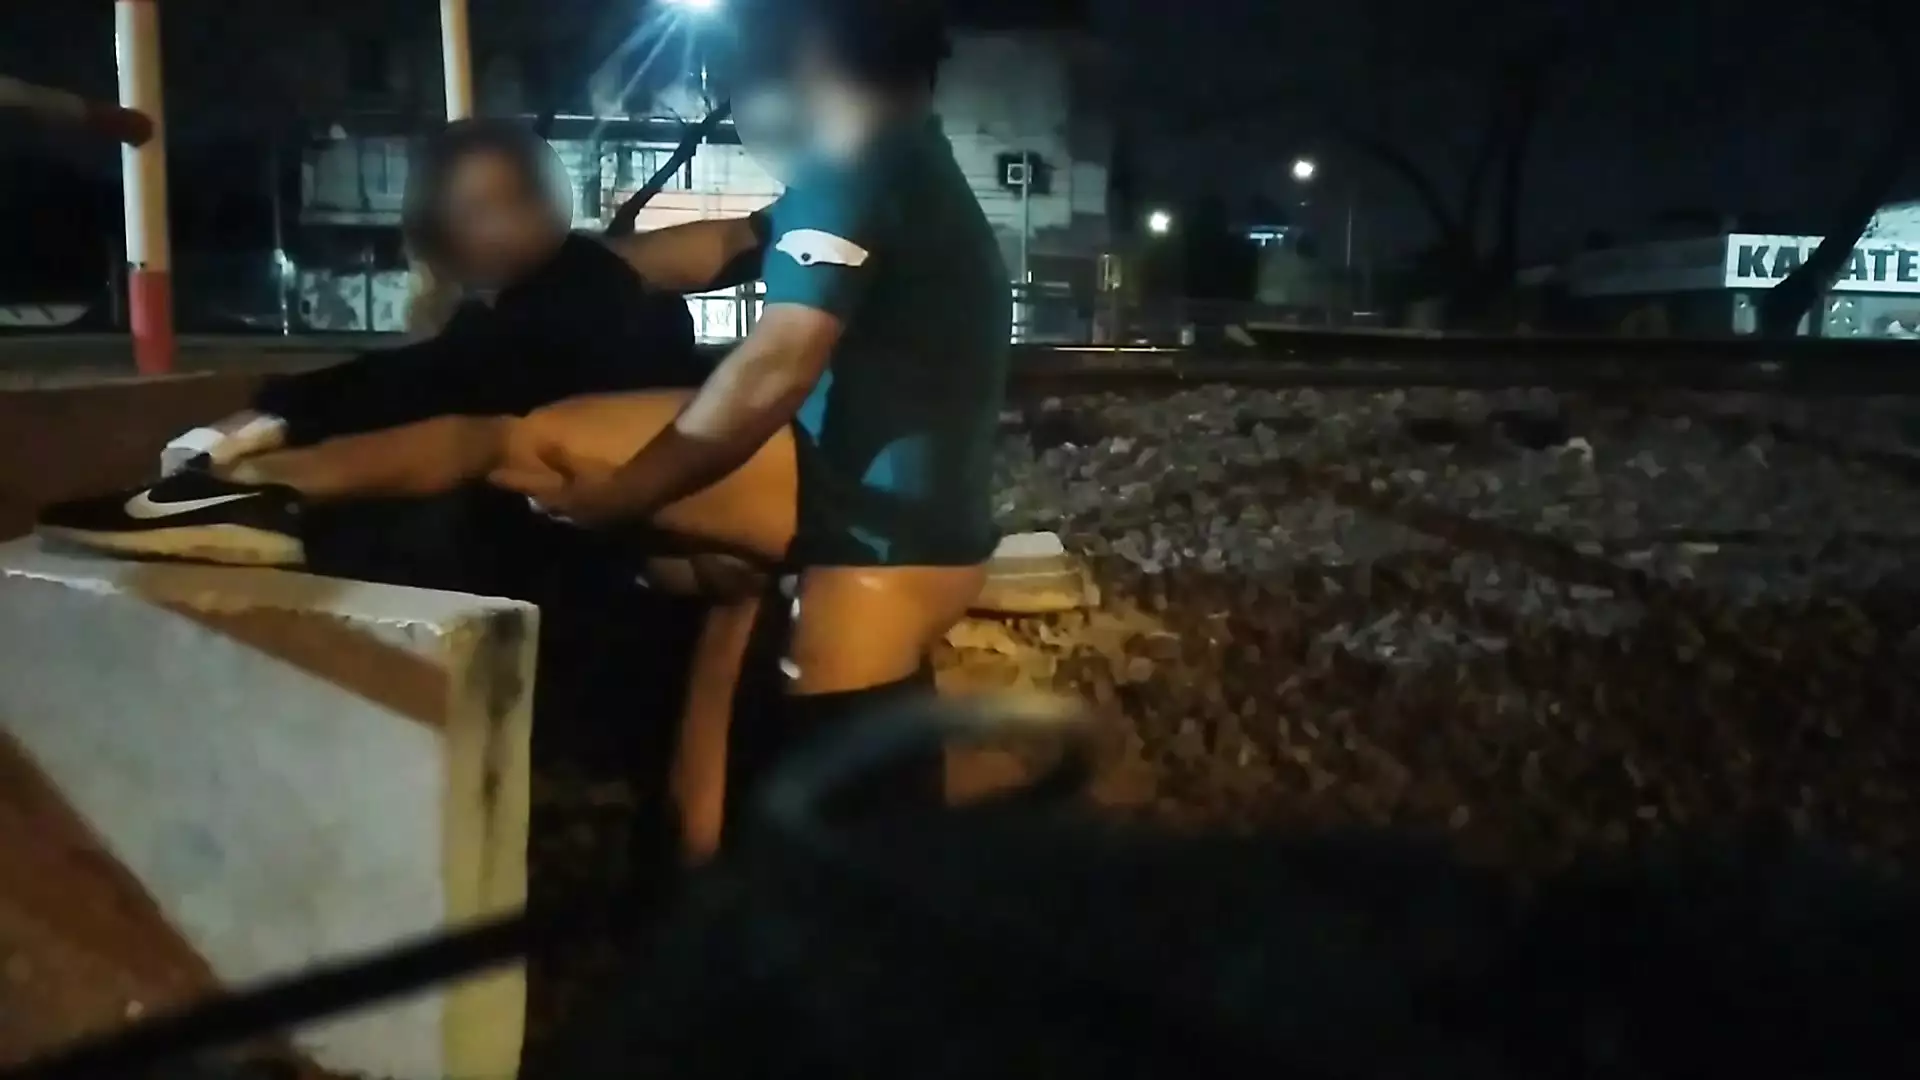 sex on the streets in public caught by stranger voyeurs walking naked through the city image